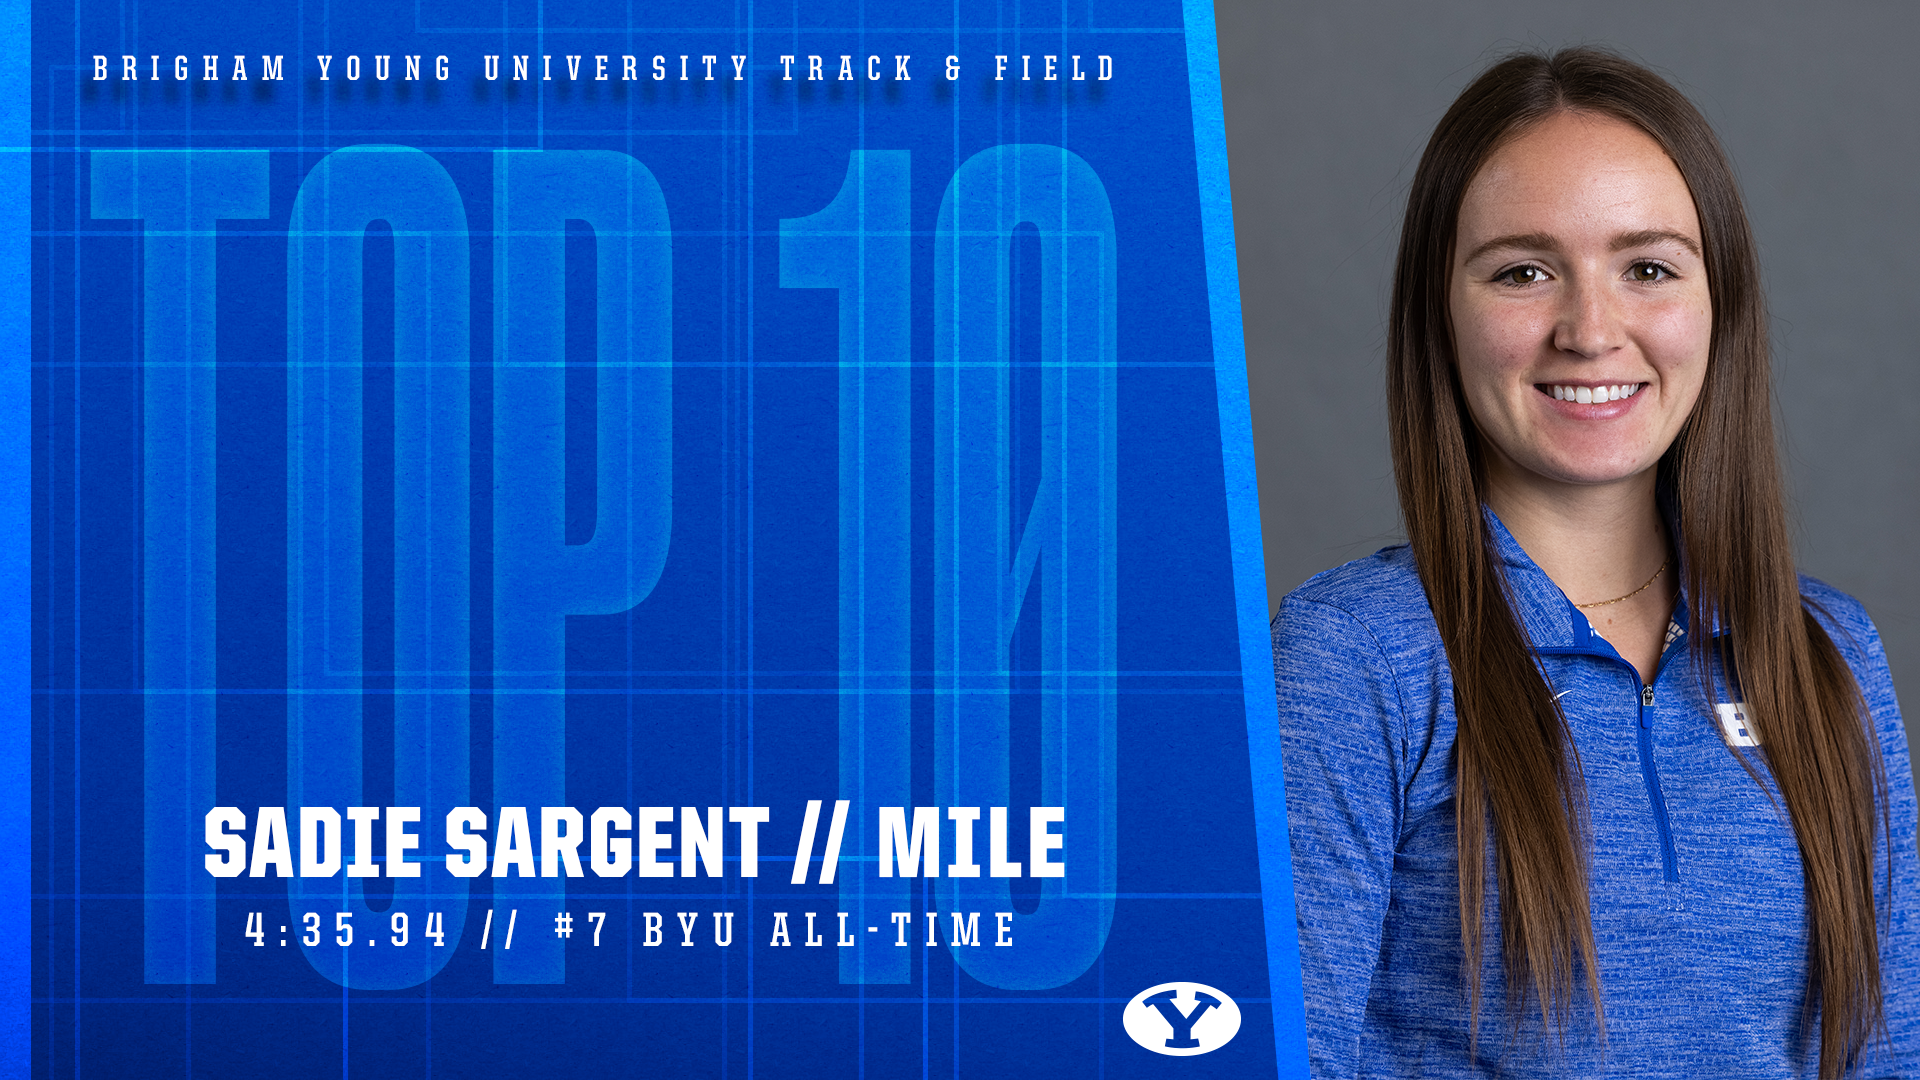 Sadie Sargent No. 7 all-time at BYU women's indoor mile. 